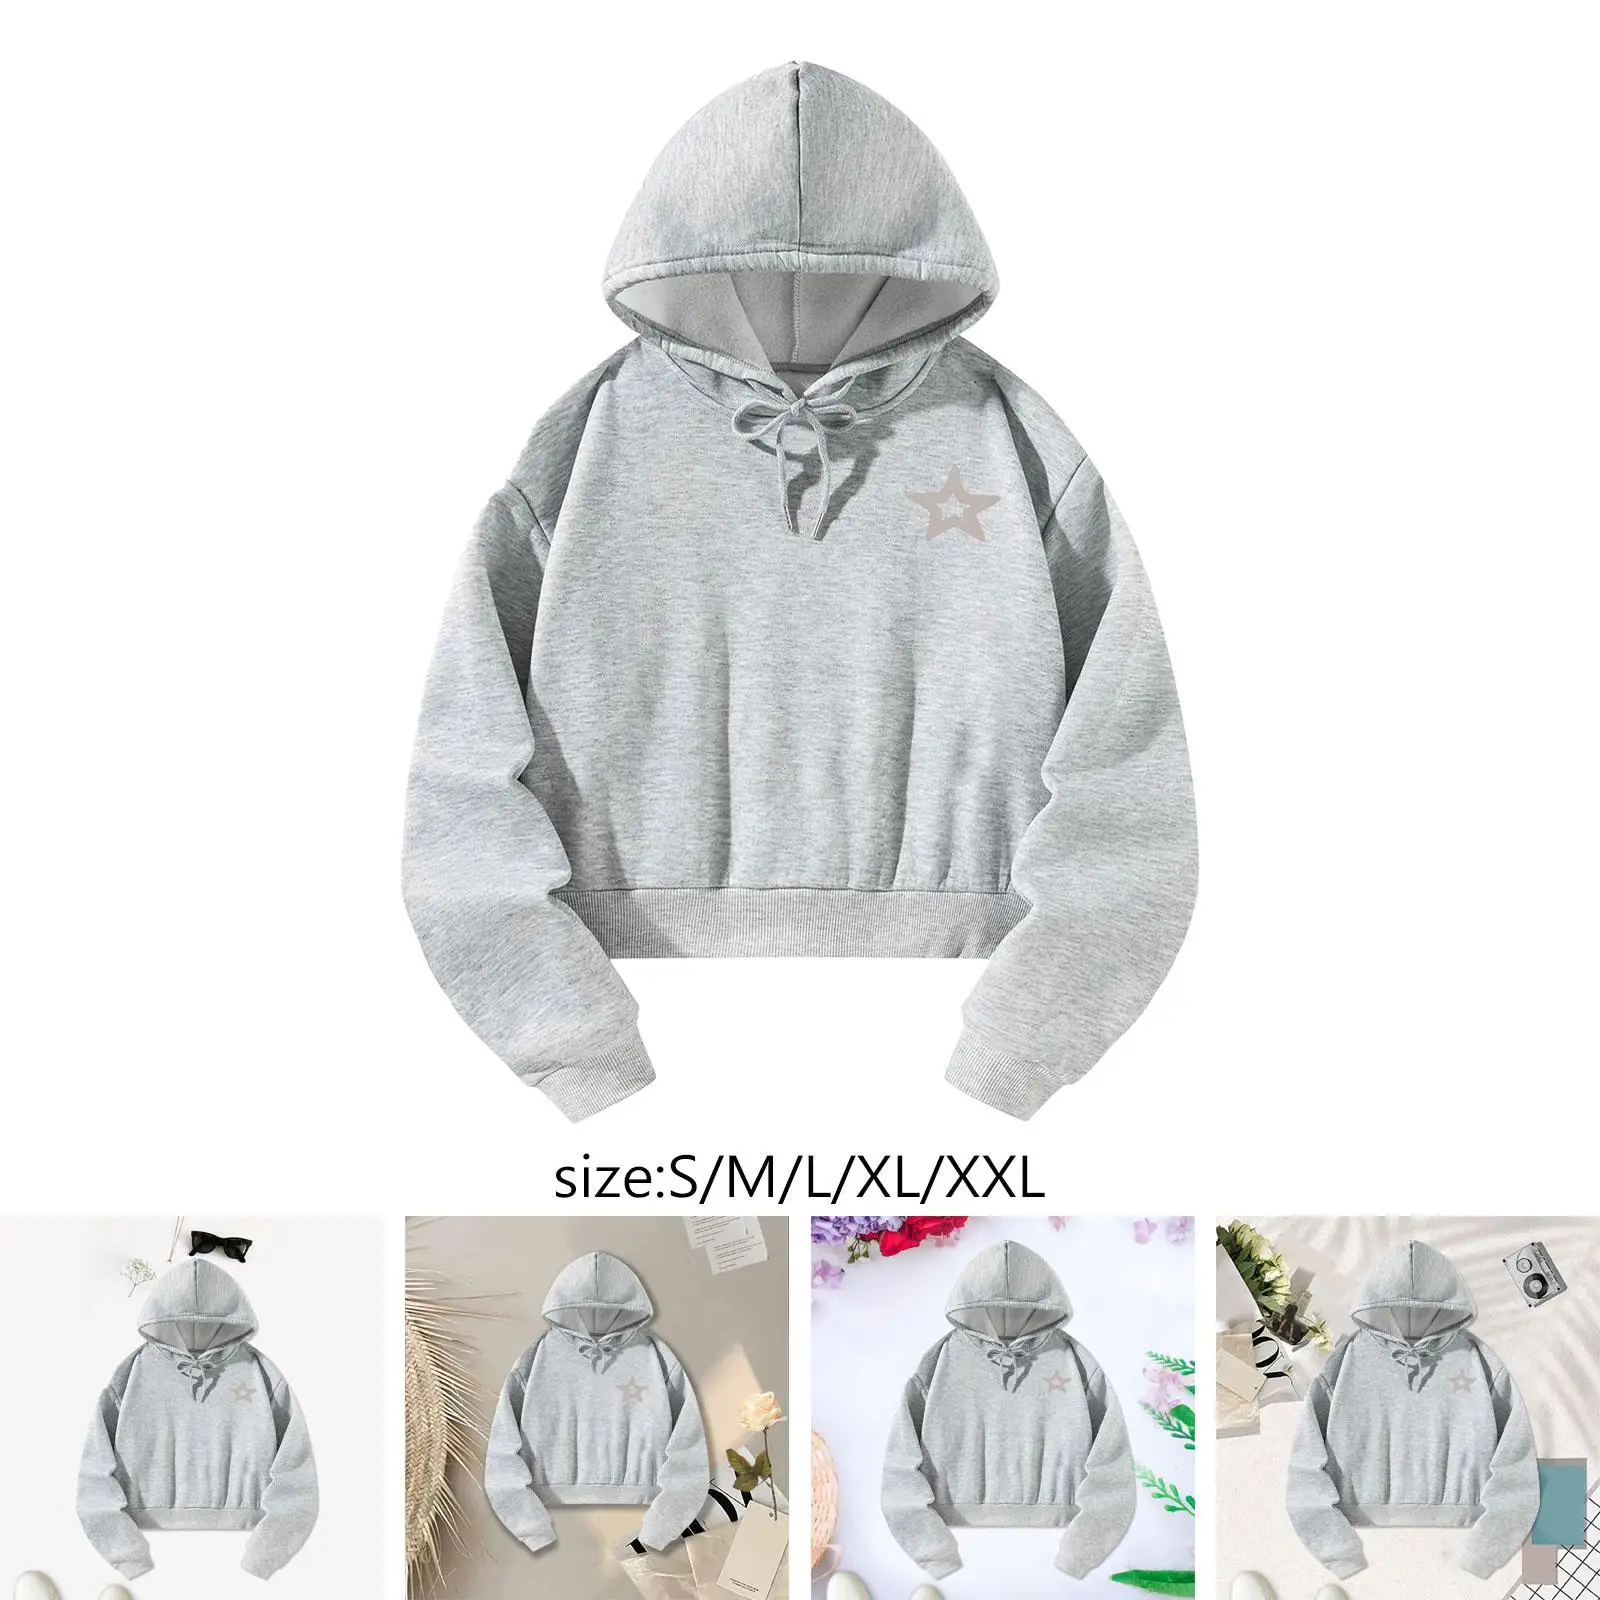 Women`s Hoodies Long Sleeve Cropped Sweatshirt Grey Gym Clothes Hooded Sweatshirt for Street Camping Outdoor Travel Daily Wear